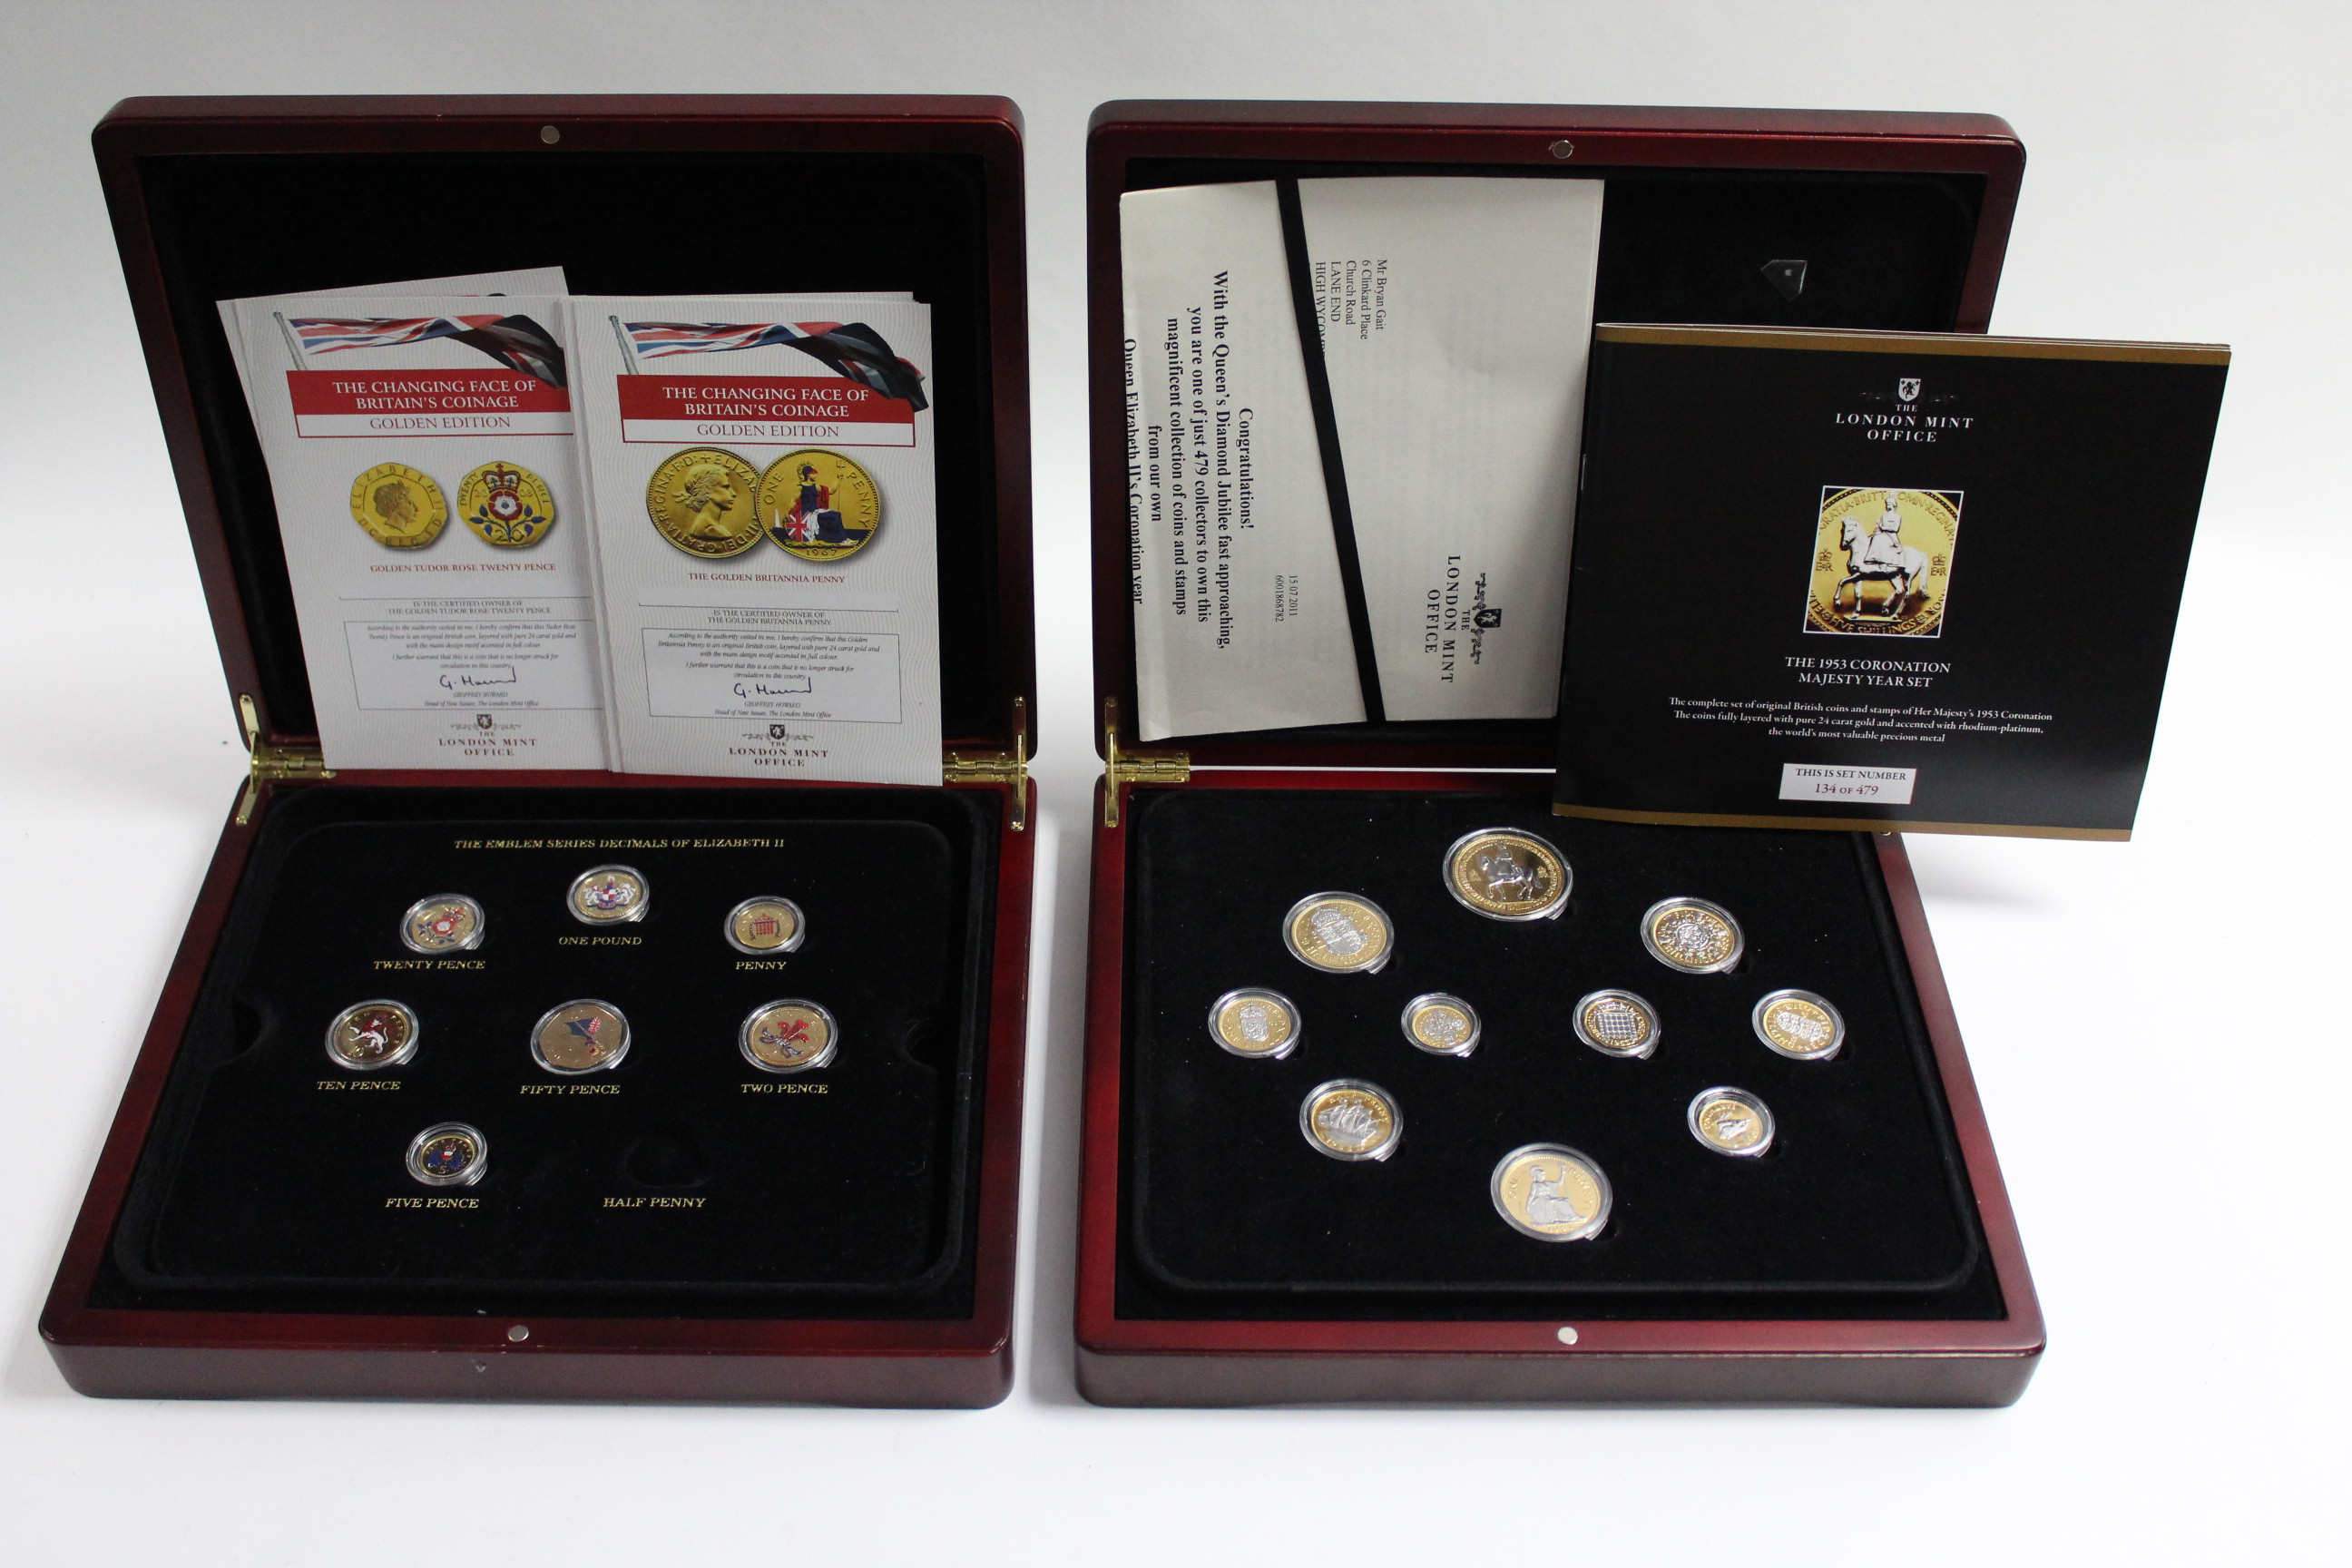 A set of seventeen “Changing Face of Britain’s Coinage National Emblem” gold-plated & rhodium-